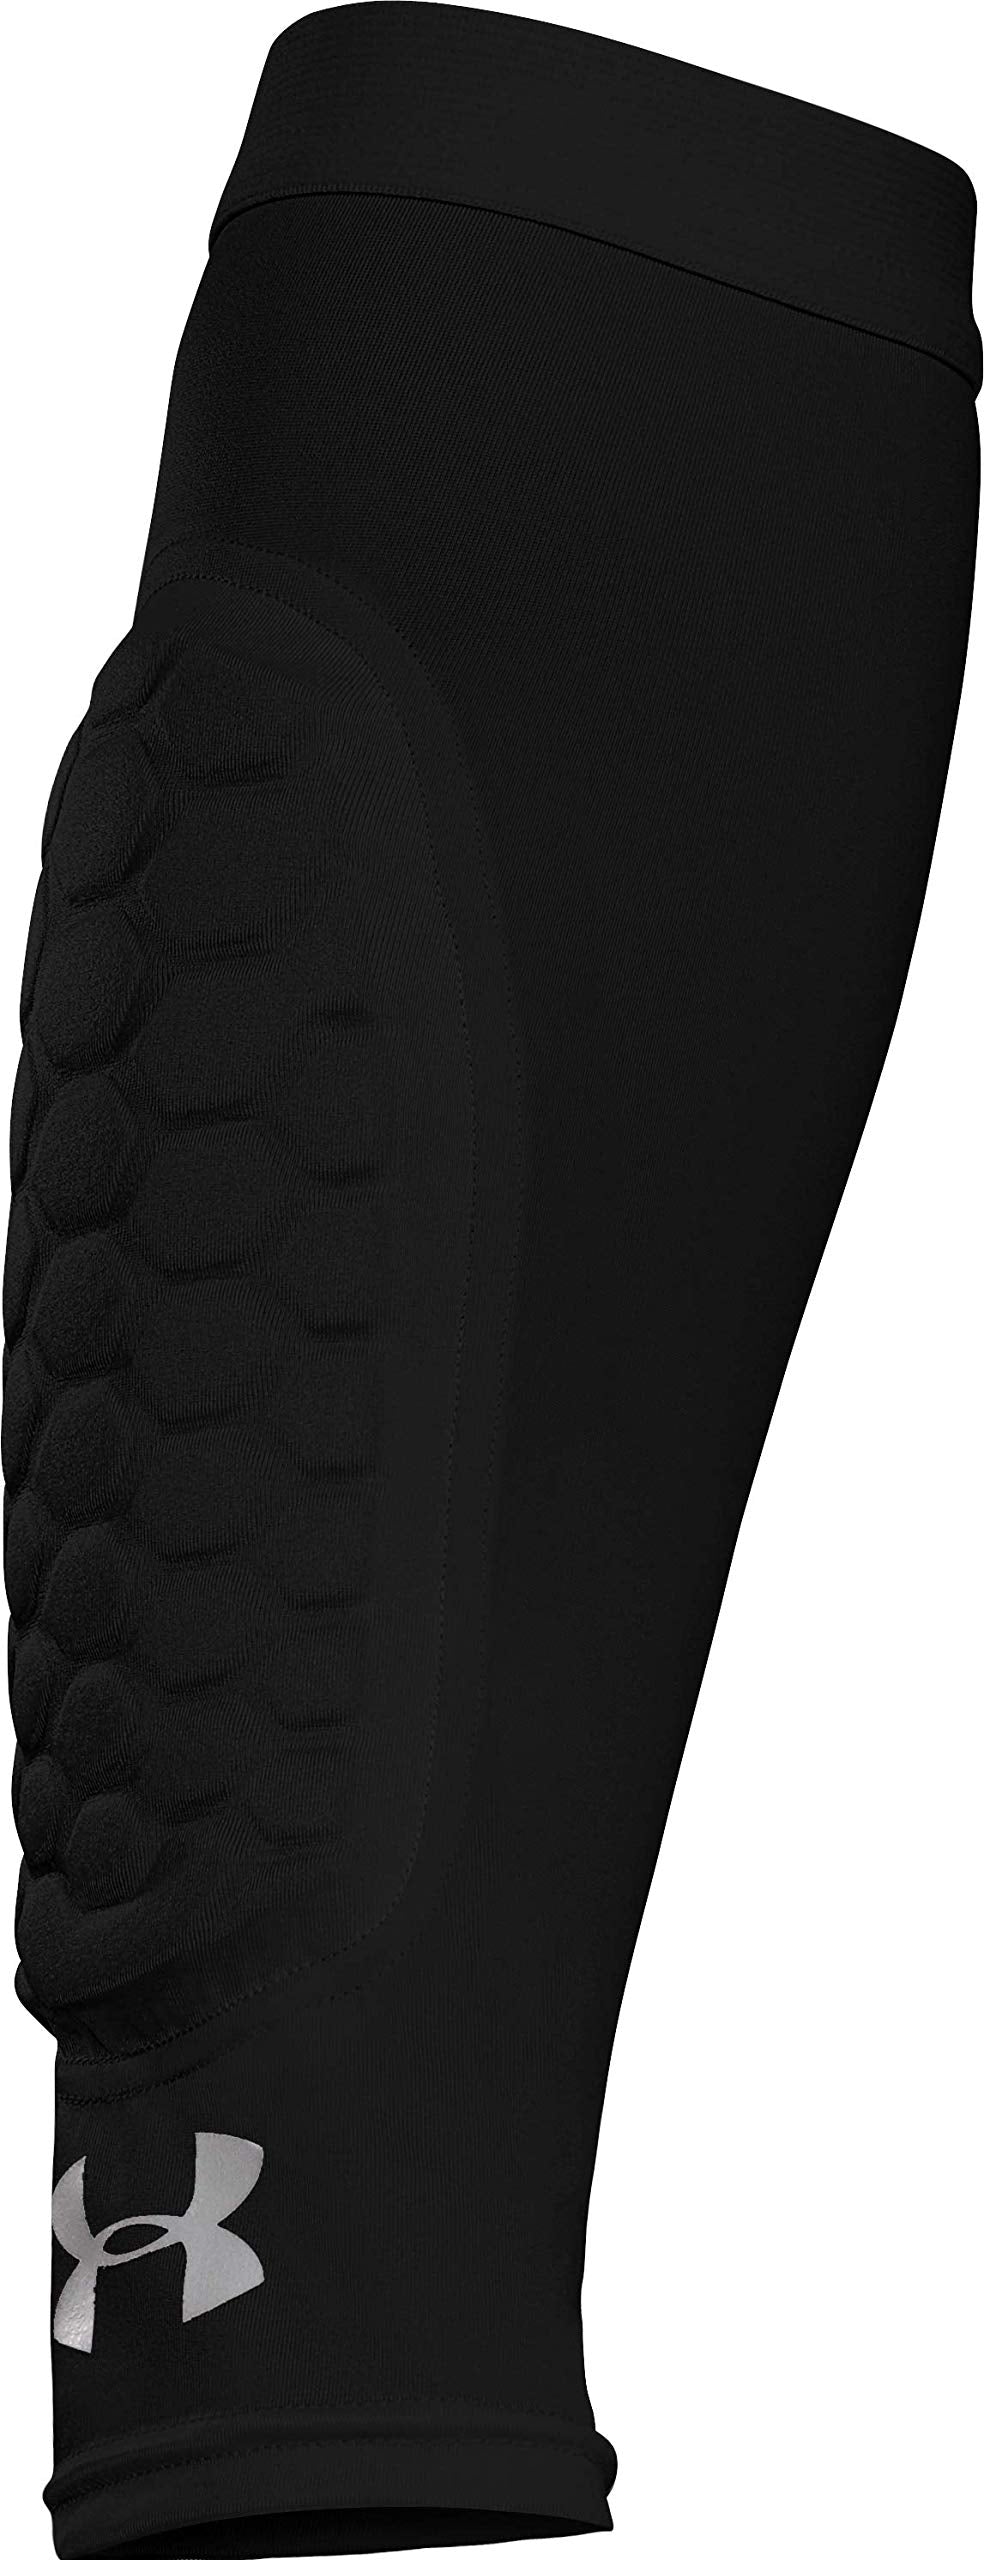 Under Armour Pro Hex Padded Forearm Sleeves for Football, Basketball, Volleyball and More, Youth & Adult Sizes, Sold as Pair